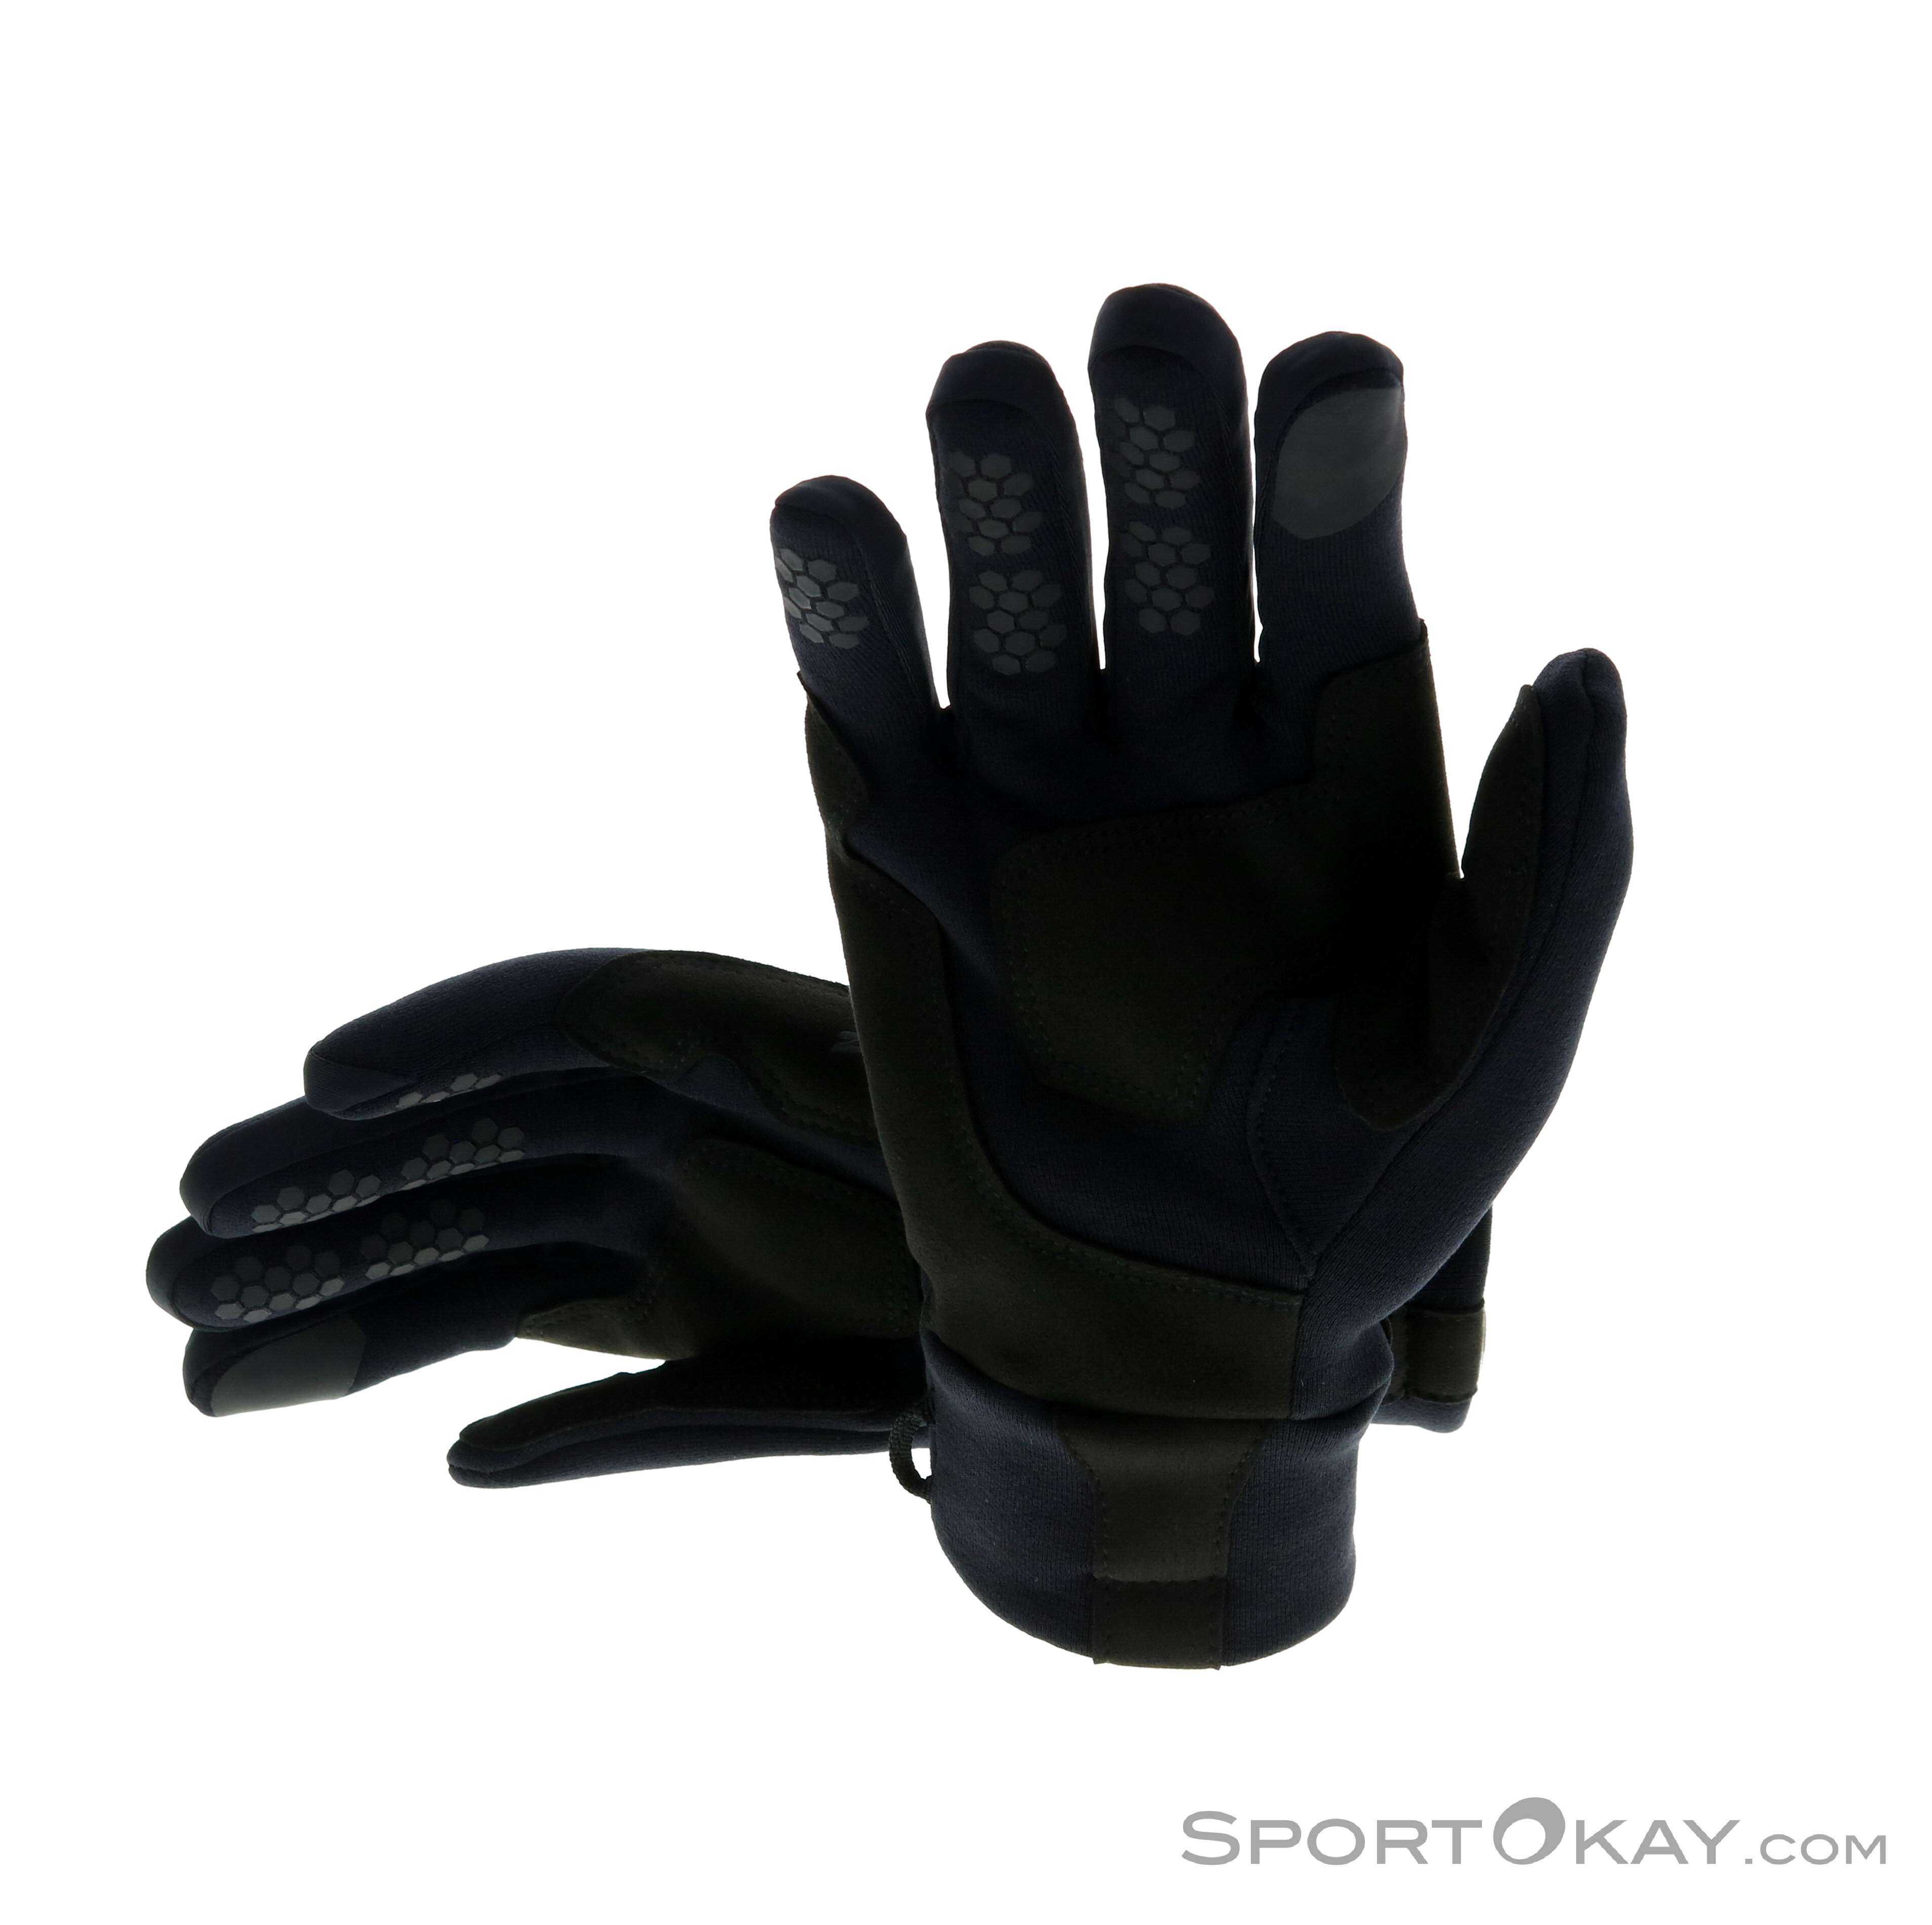 Ziener Gusty Touch Gloves - Gloves - Outdoor Clothing - Outdoor - All